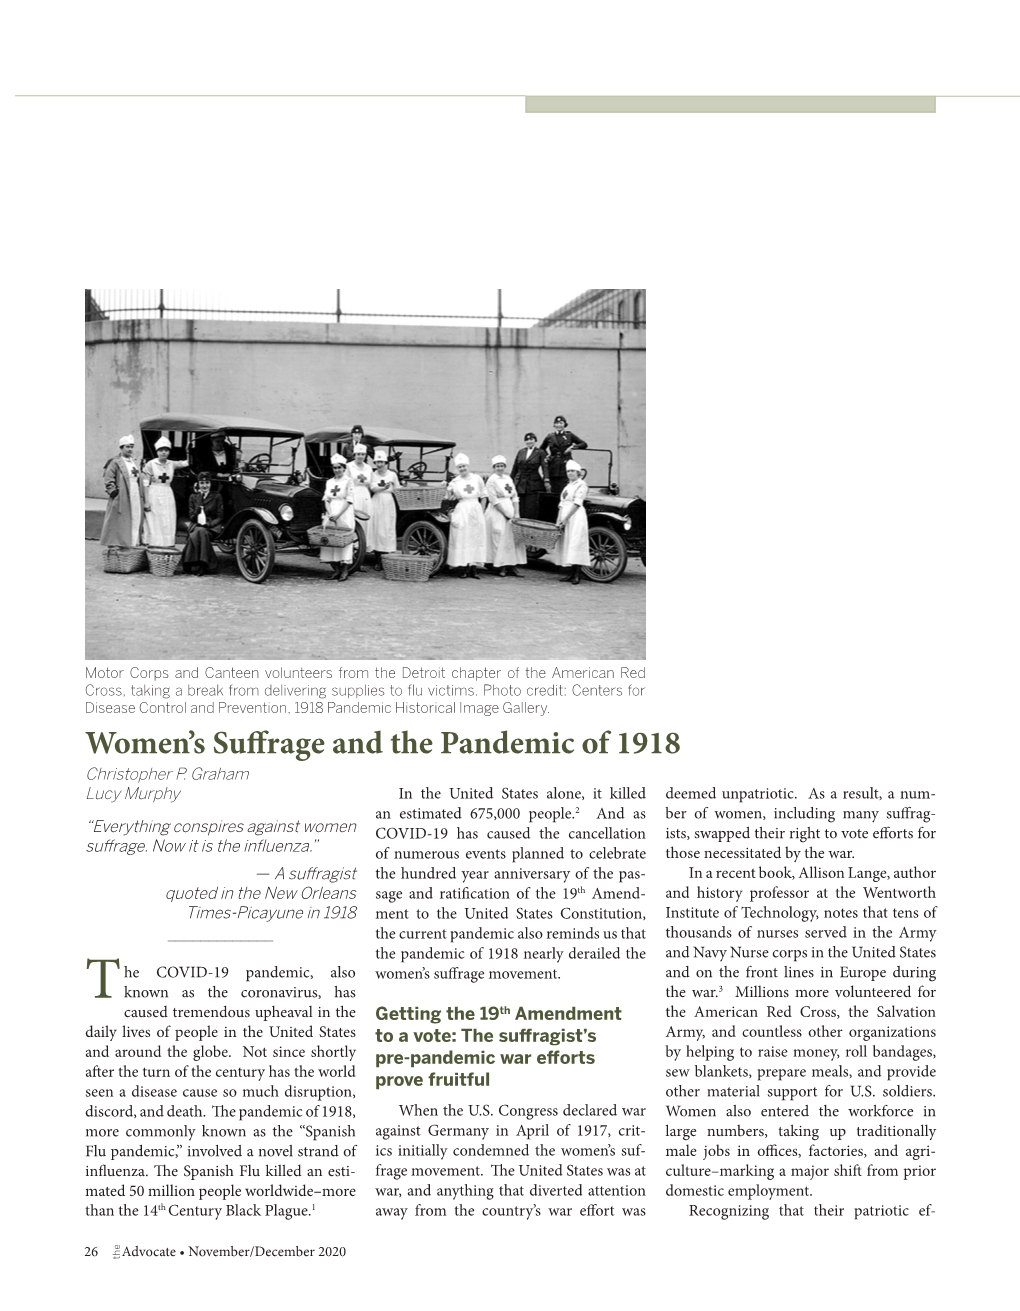 Women's Suffrage and the Pandemic of 1918